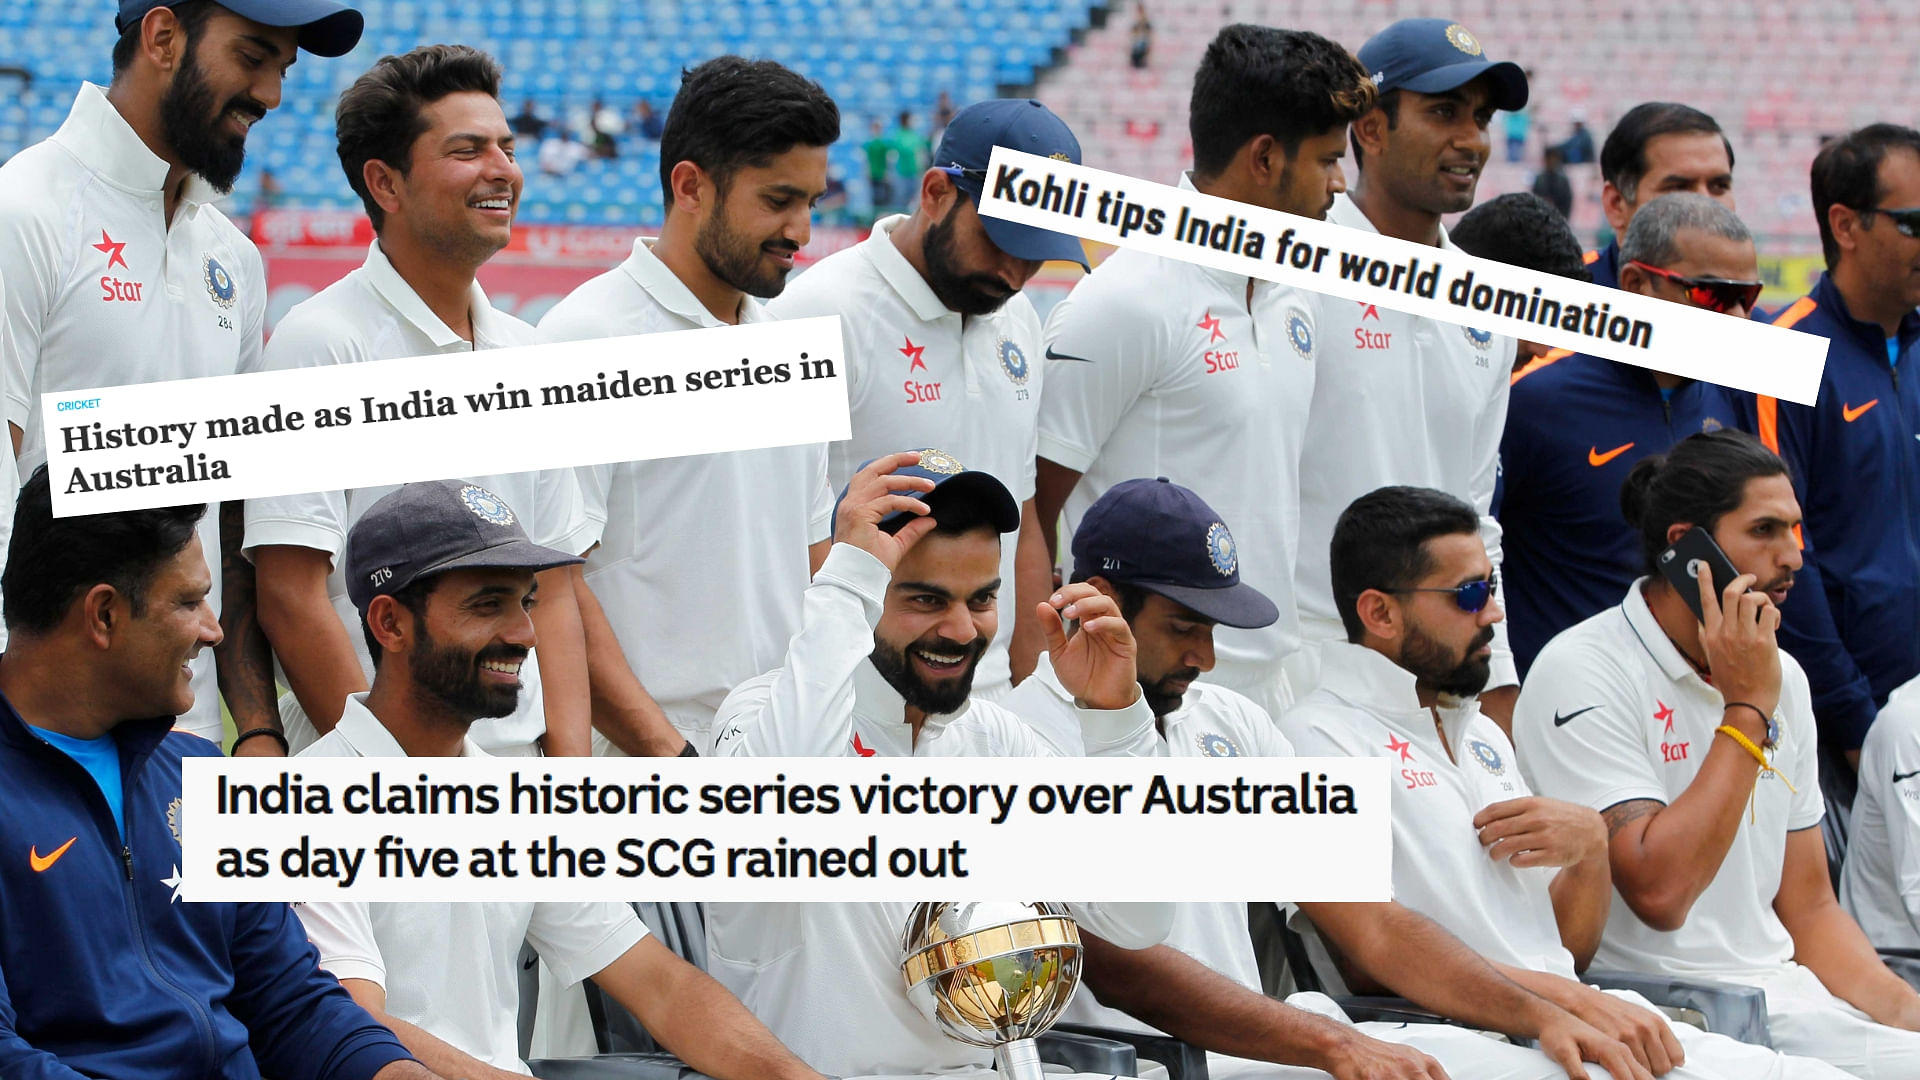 Australian media called India’s Test series win ‘historic’, further accepting that its the batting that left the Aussies behind.